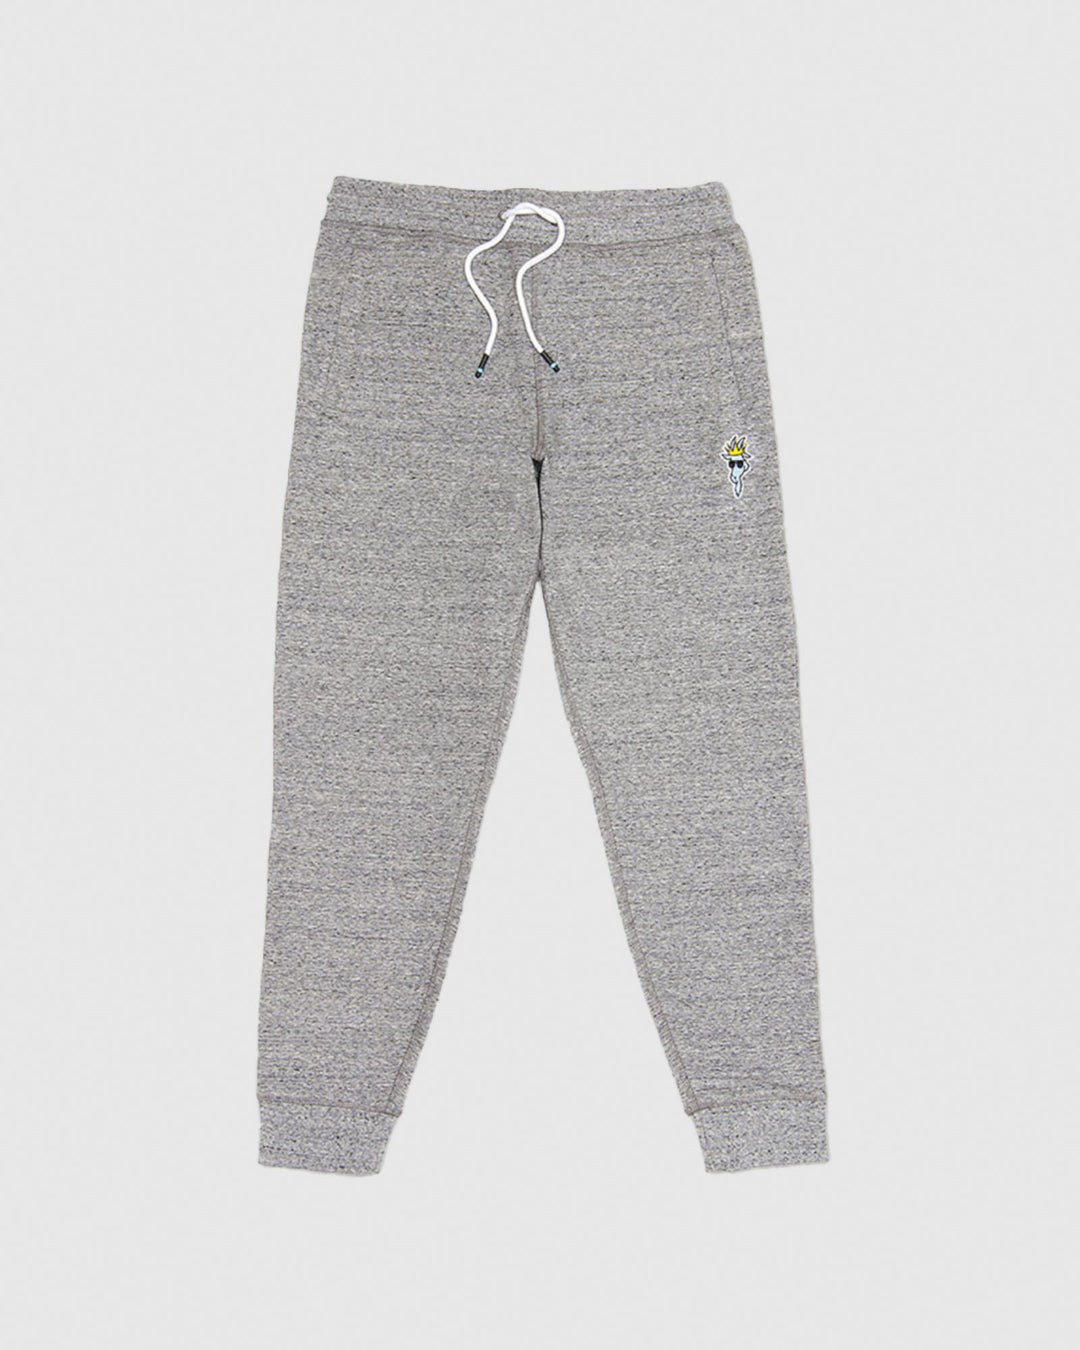 Front of light gray Women's Athletic Joggers#color_lt-gray